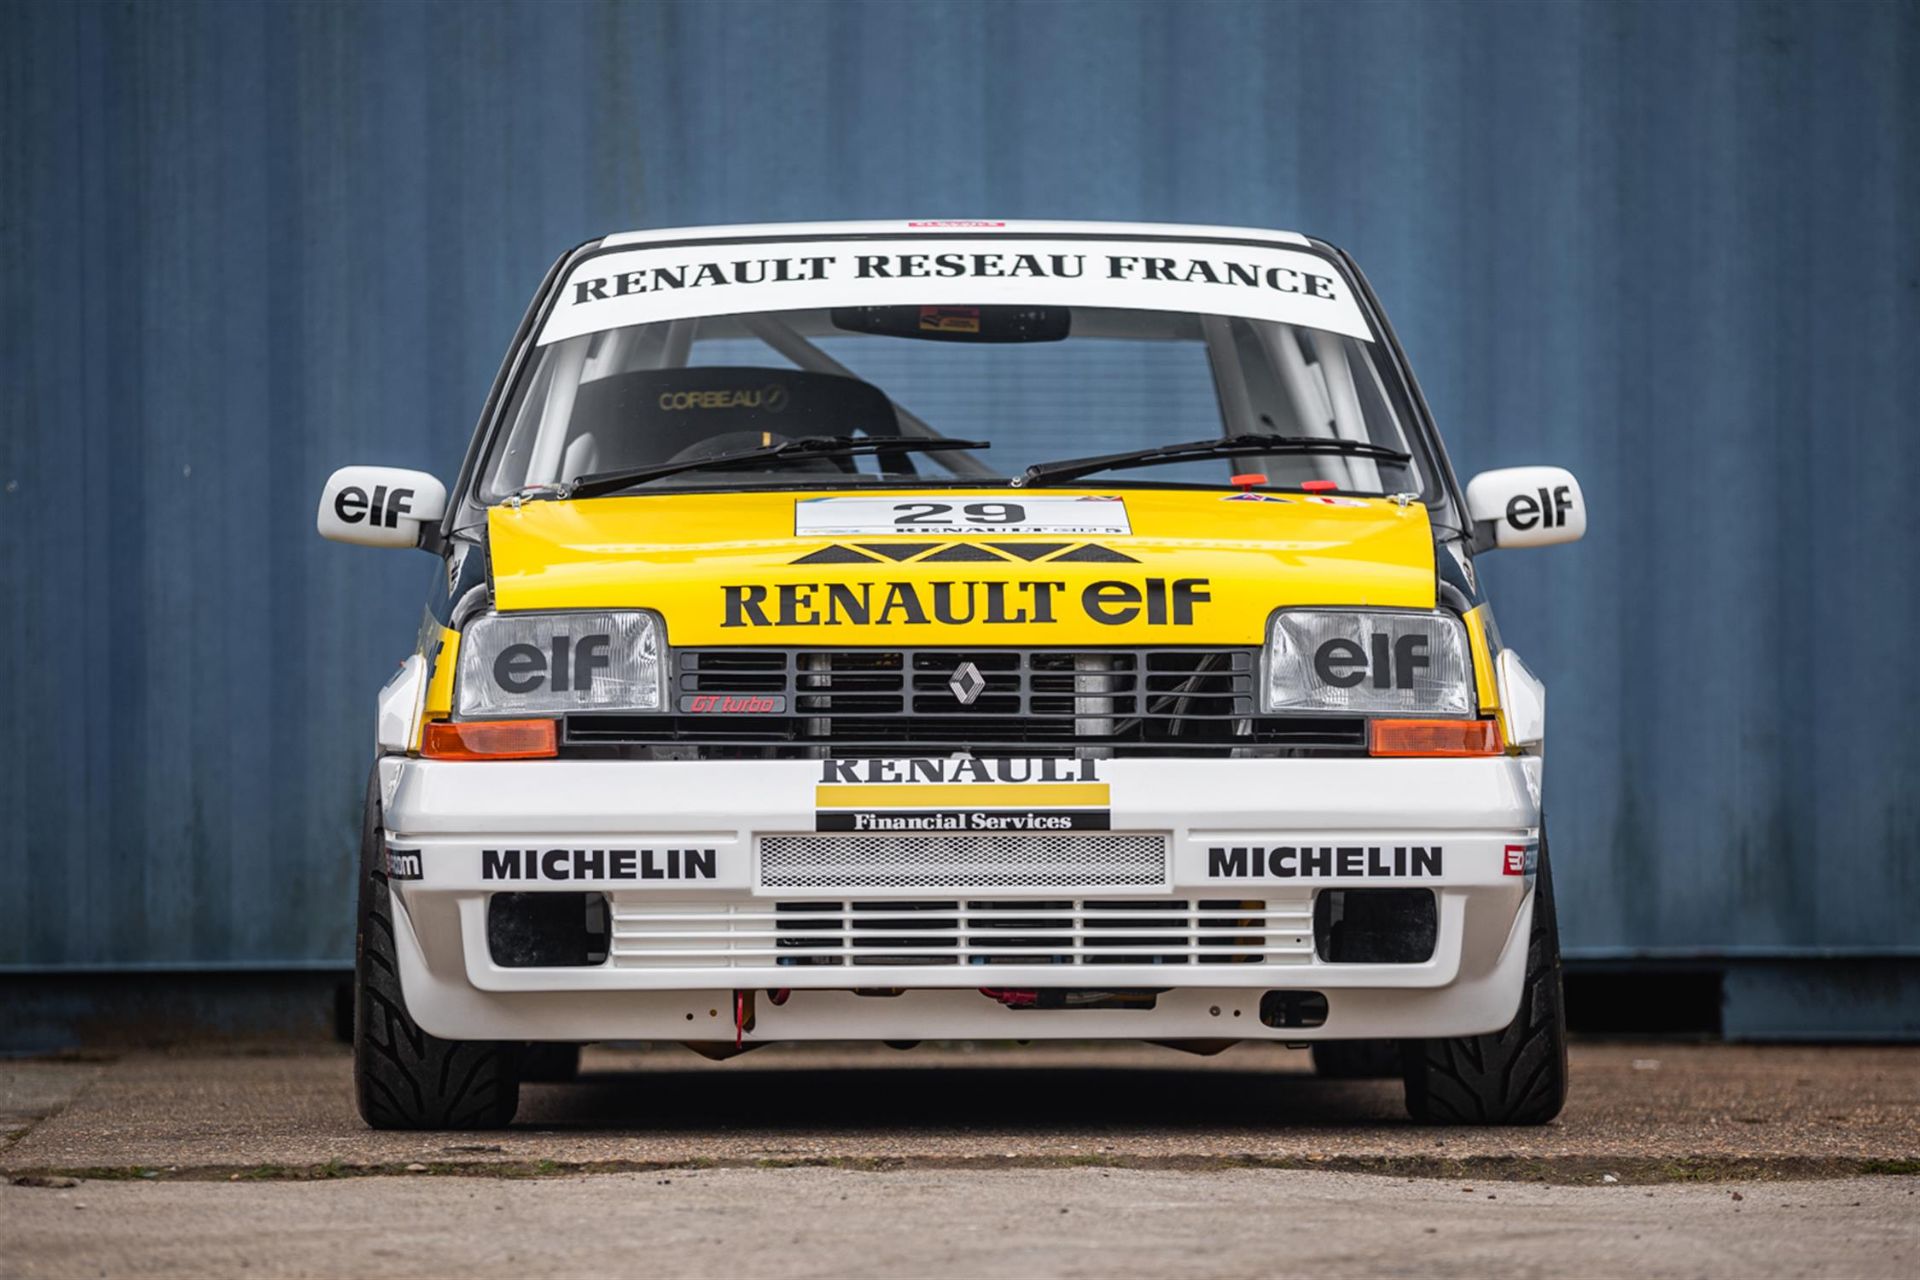 1986 Renault 5 GT Turbo Coupé Historic Touring Car - Image 6 of 10